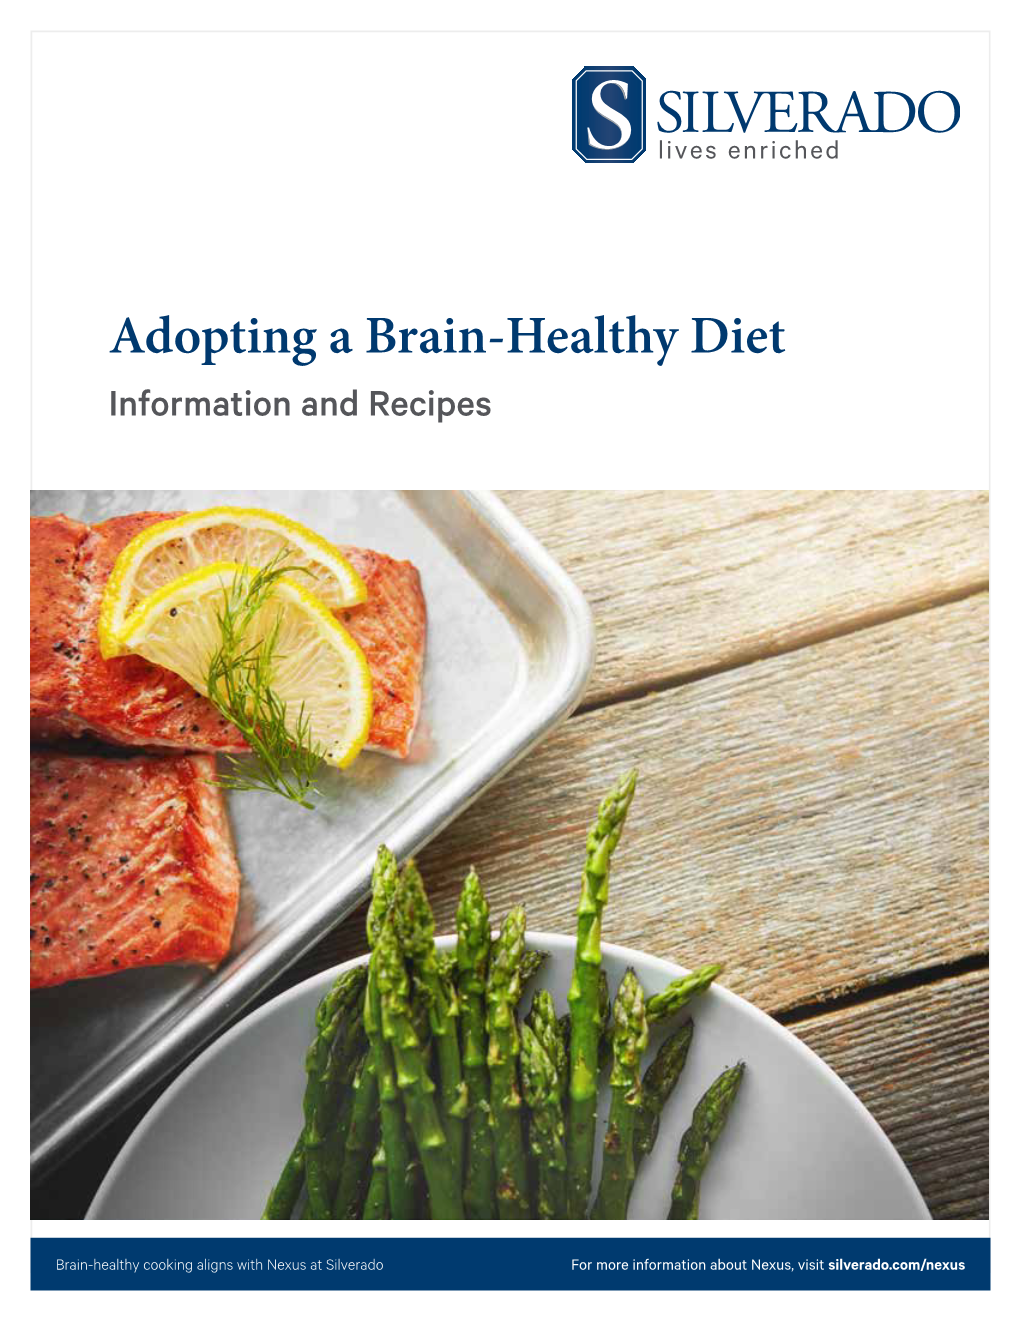 Adopting a Brain-Healthy Diet Information and Recipes